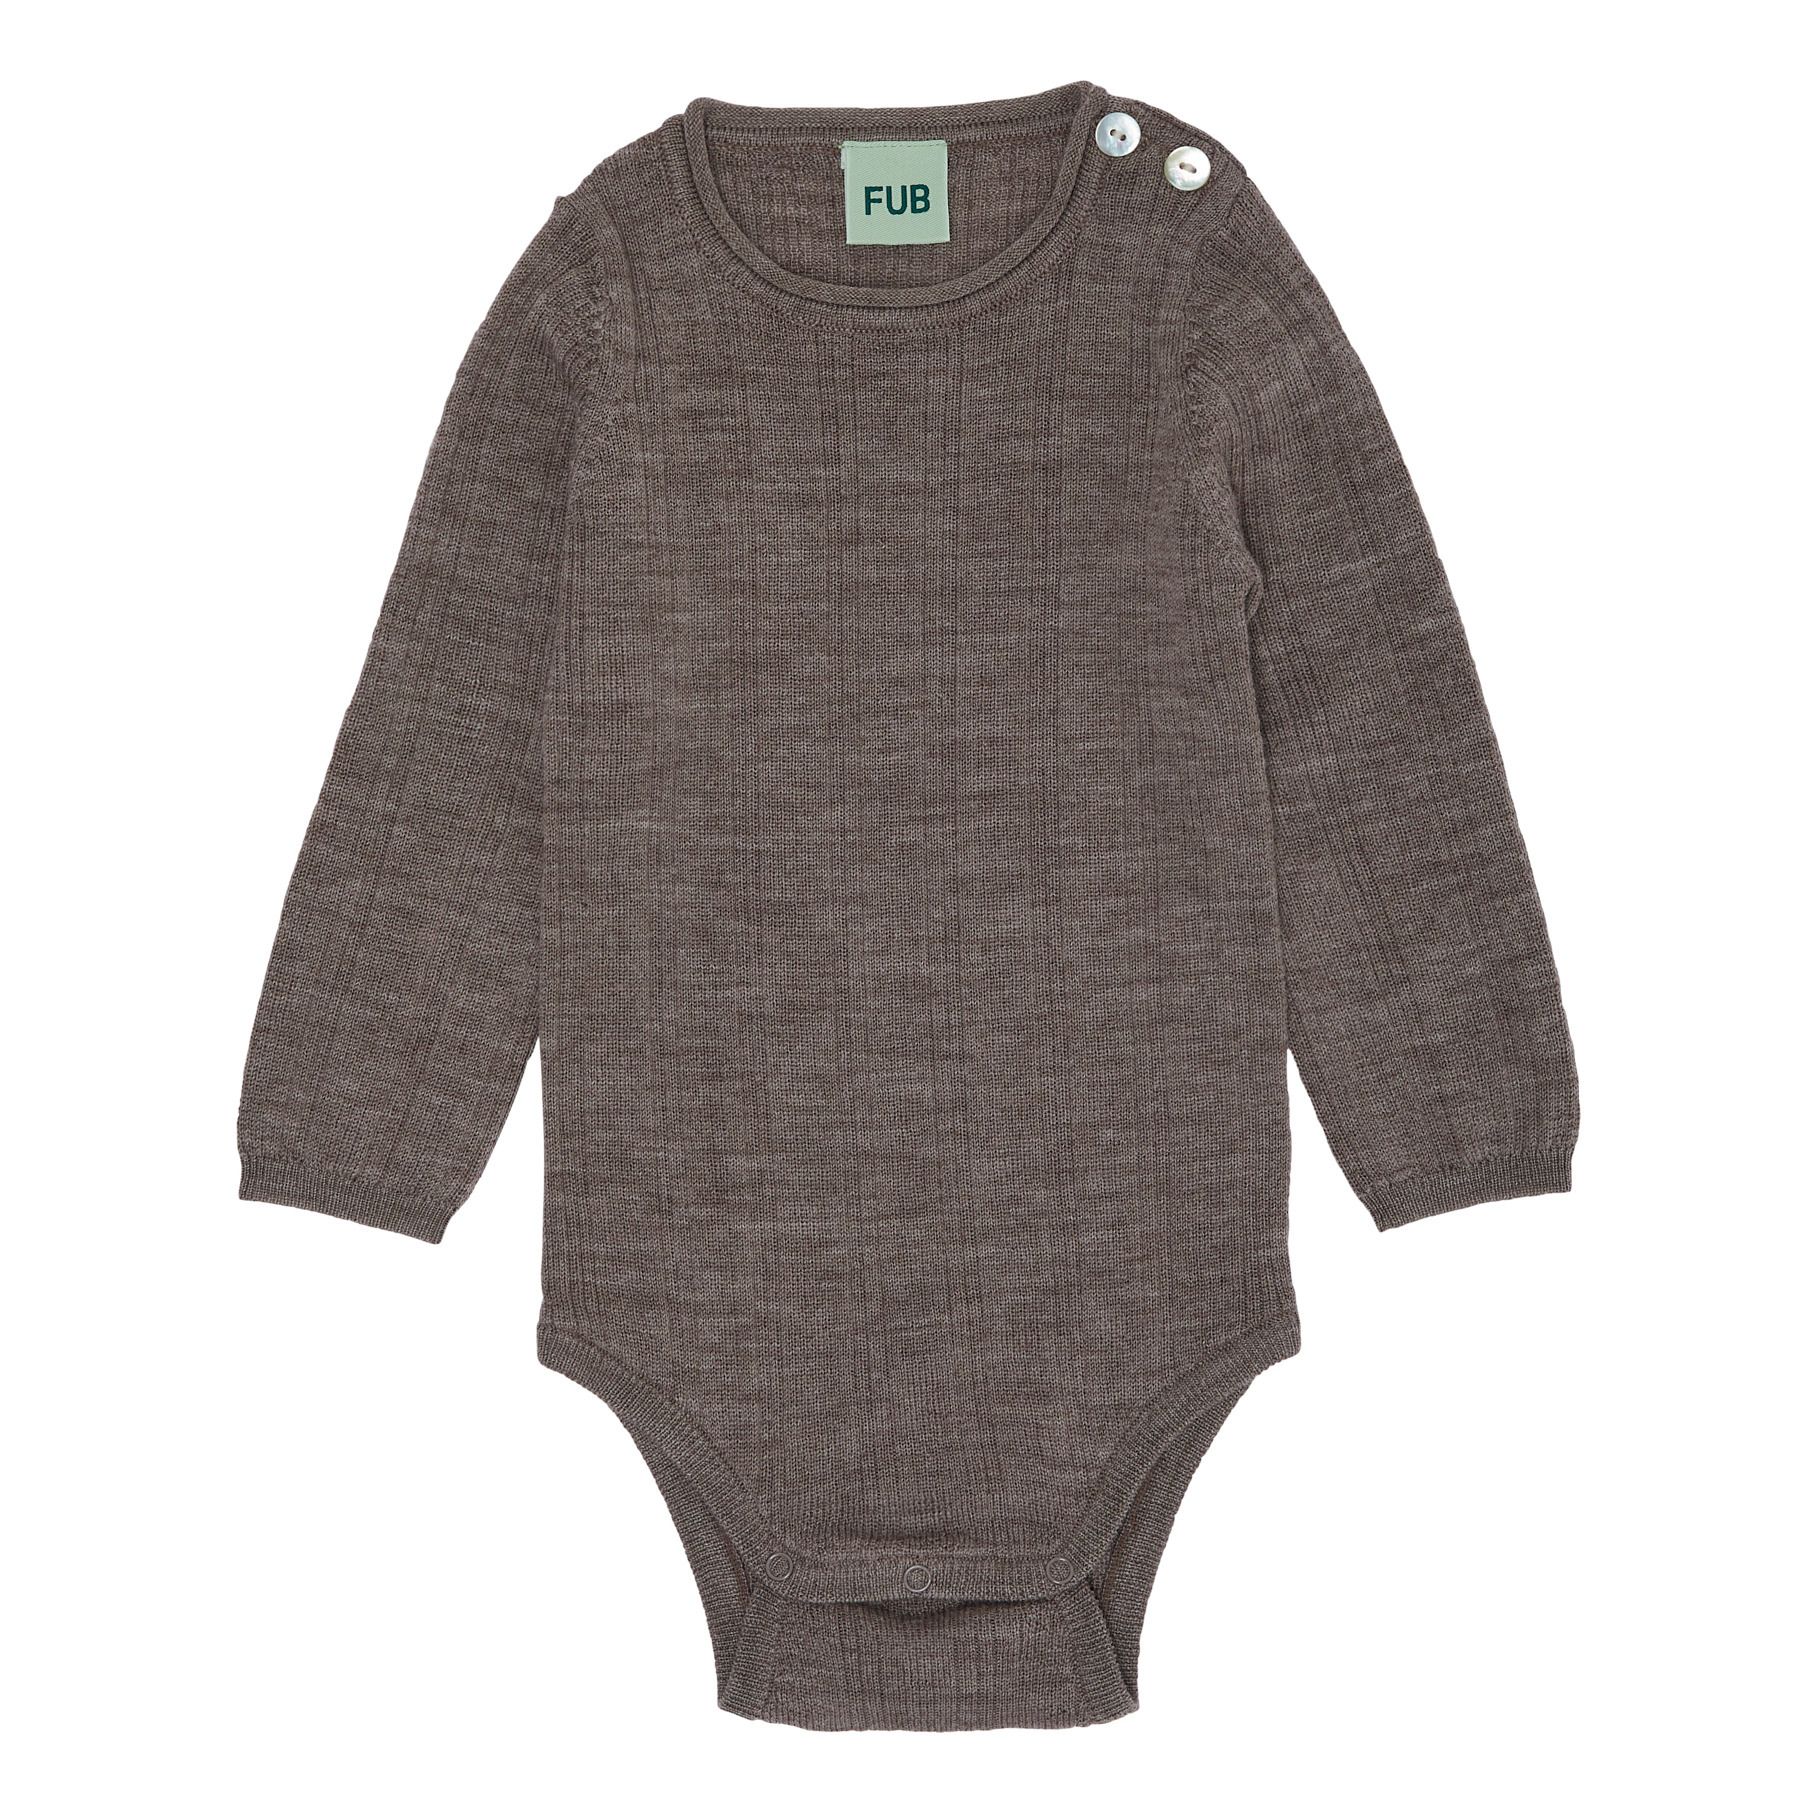 FUB - Body Laine Extra Fine - Fille - Gris taupe